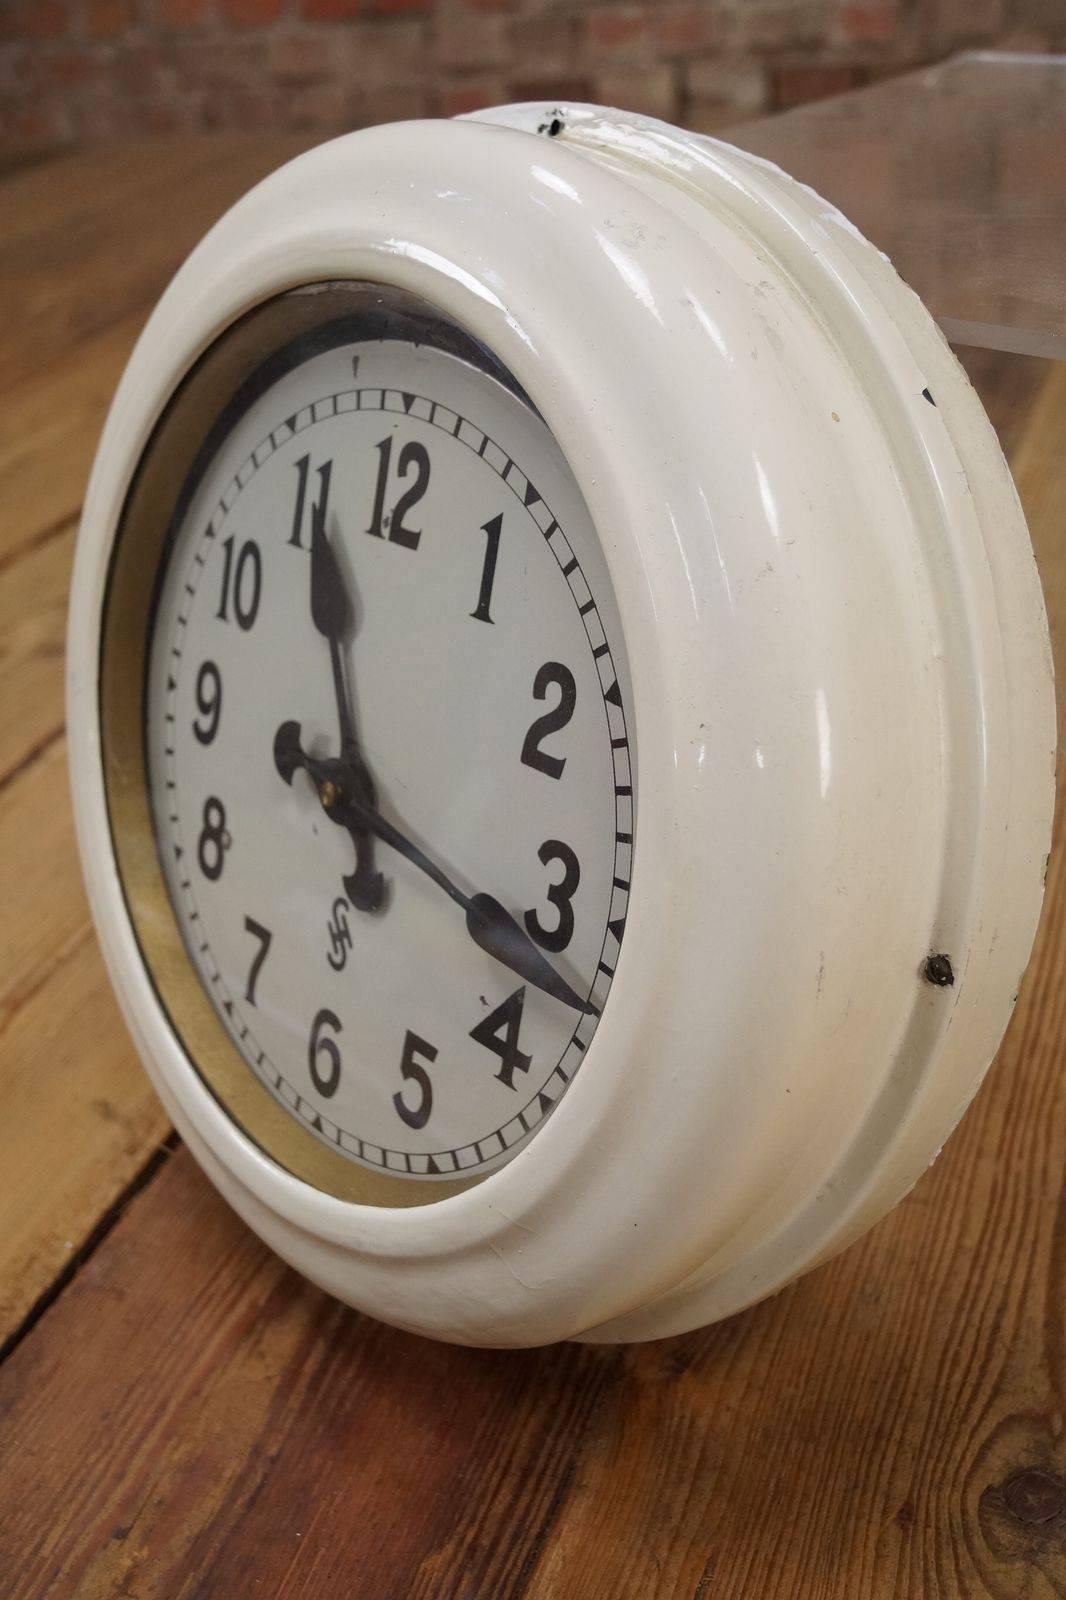 Steel painted with glass front made by Siemens Halske in Germany in the 1930s.
Formerly a station or factory slave clock, it is now fitted with a modern quartz movement with a battery.
Delivery time 2-3 weeks.